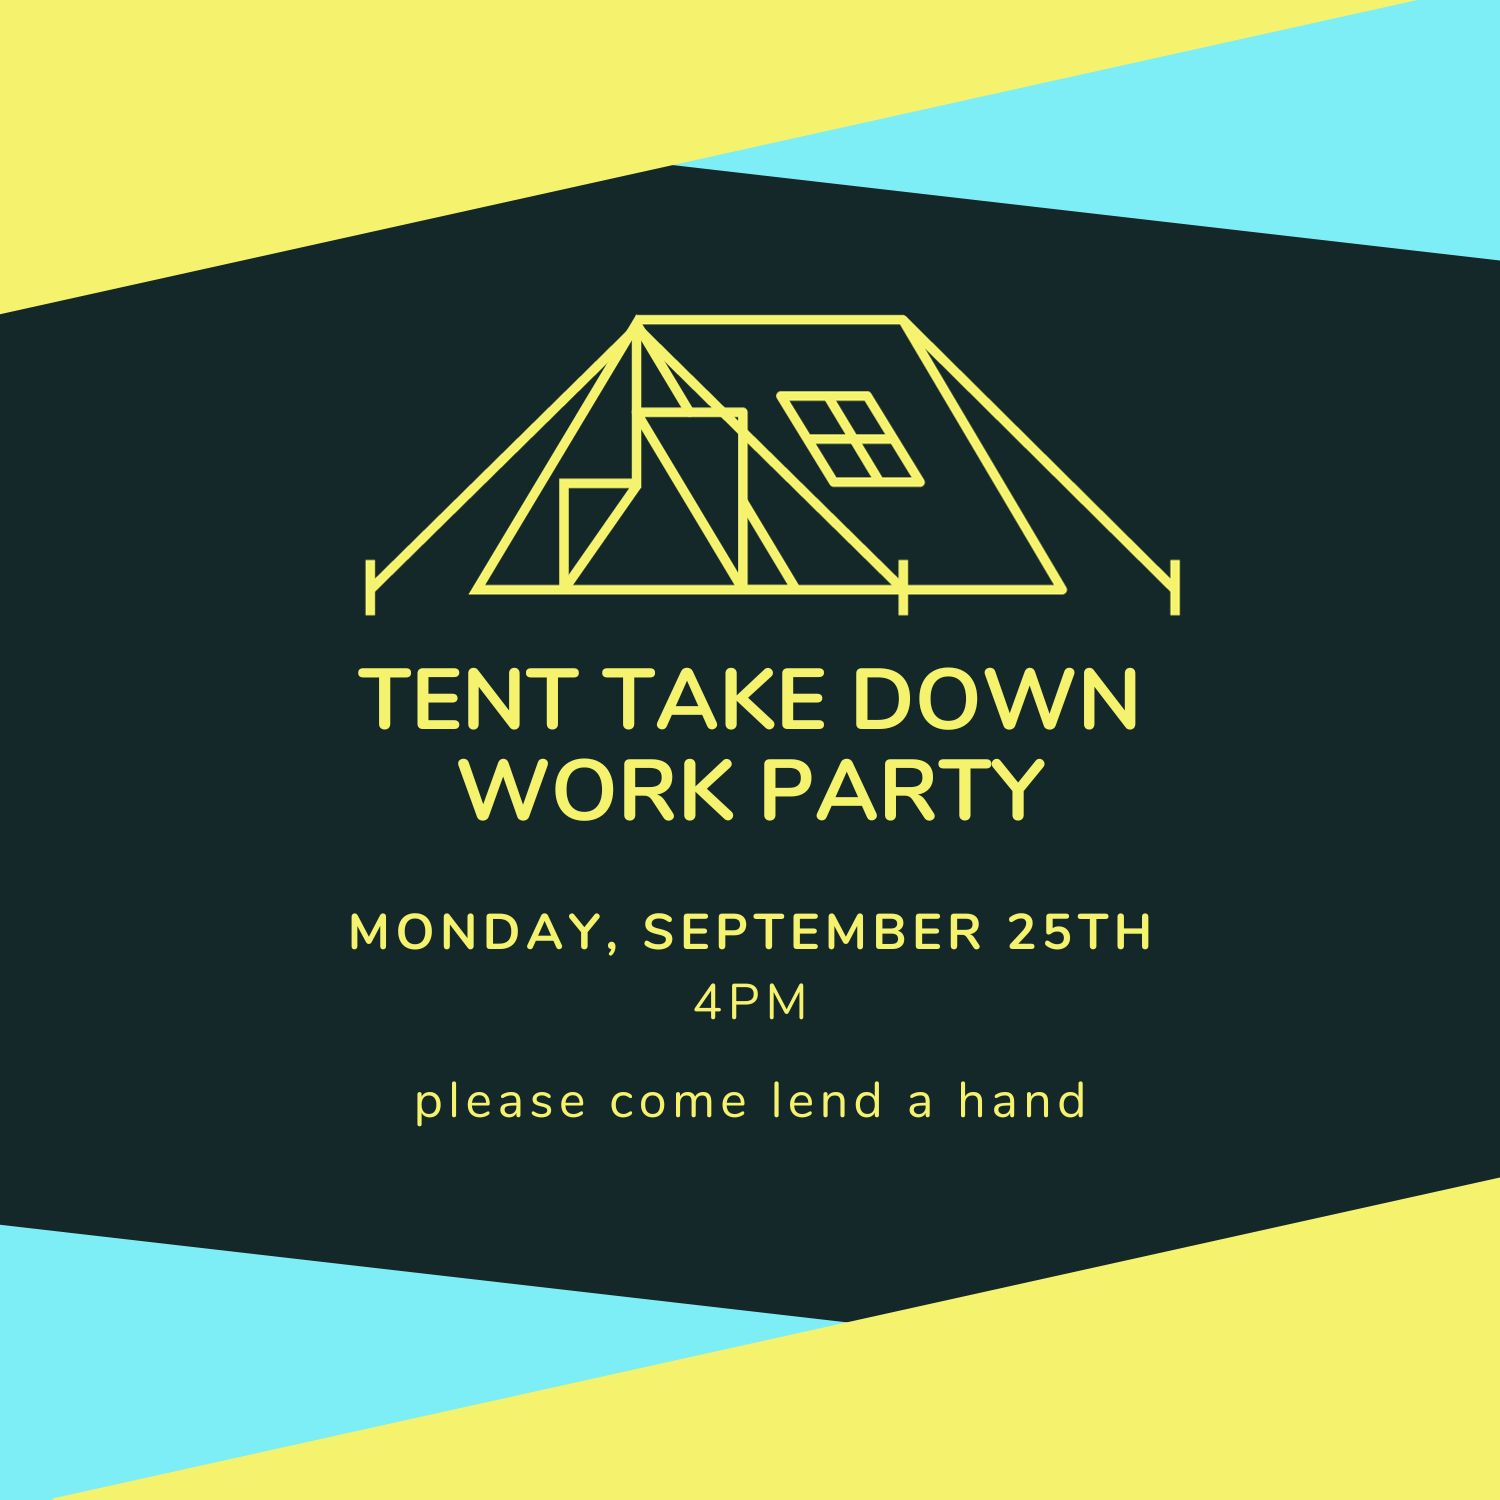 Help Us Take Down the Tent on Monday, the 25th at 4:00 PM!